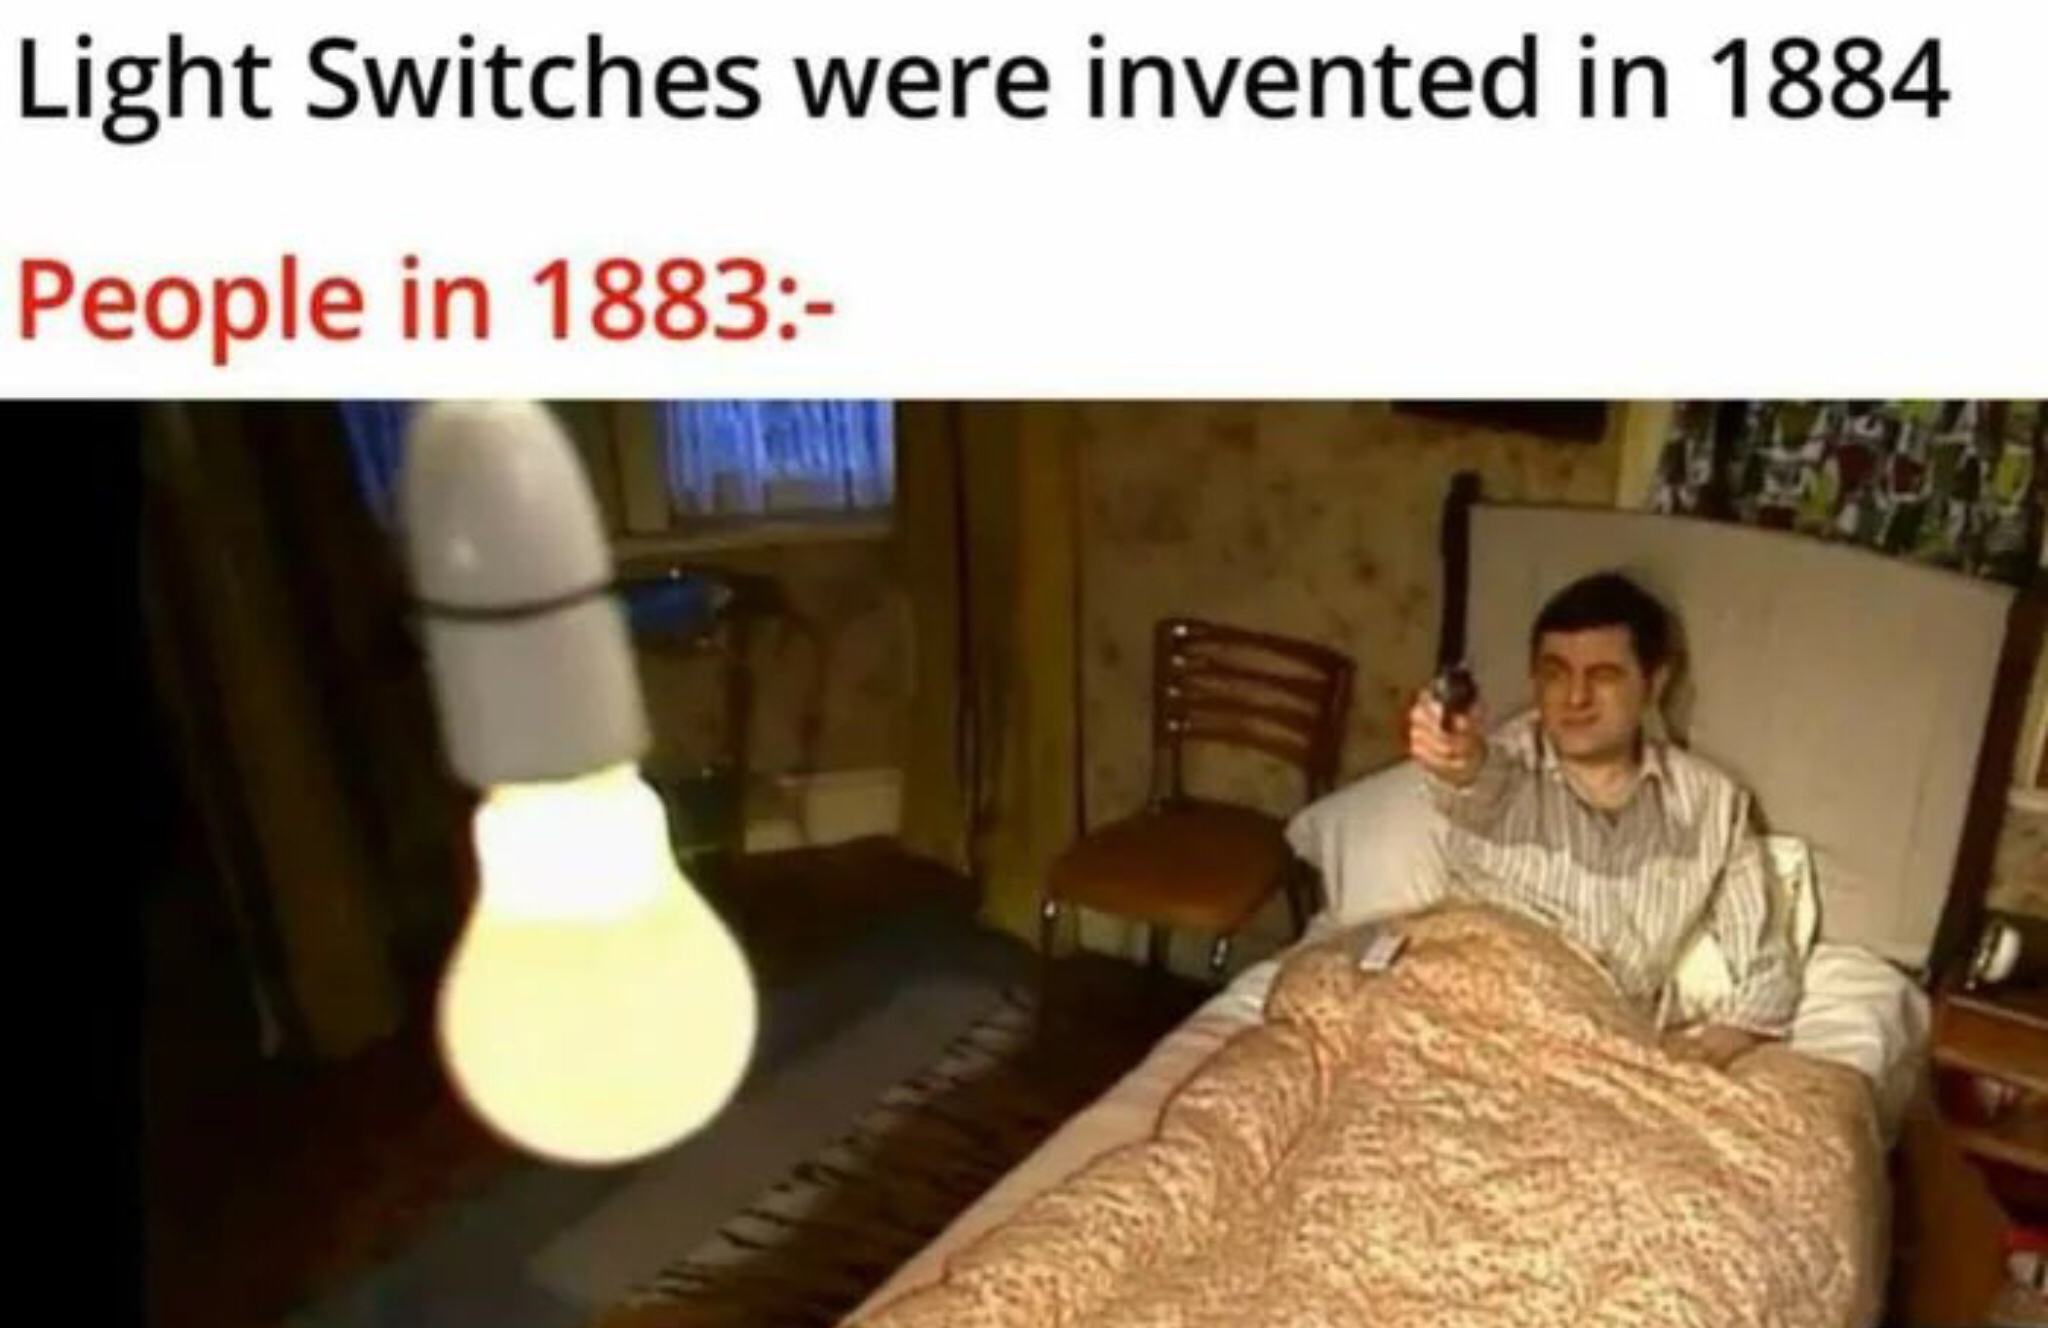 light switches were invented in 1884 meme - Light Switches were invented in 1884 People in 1883